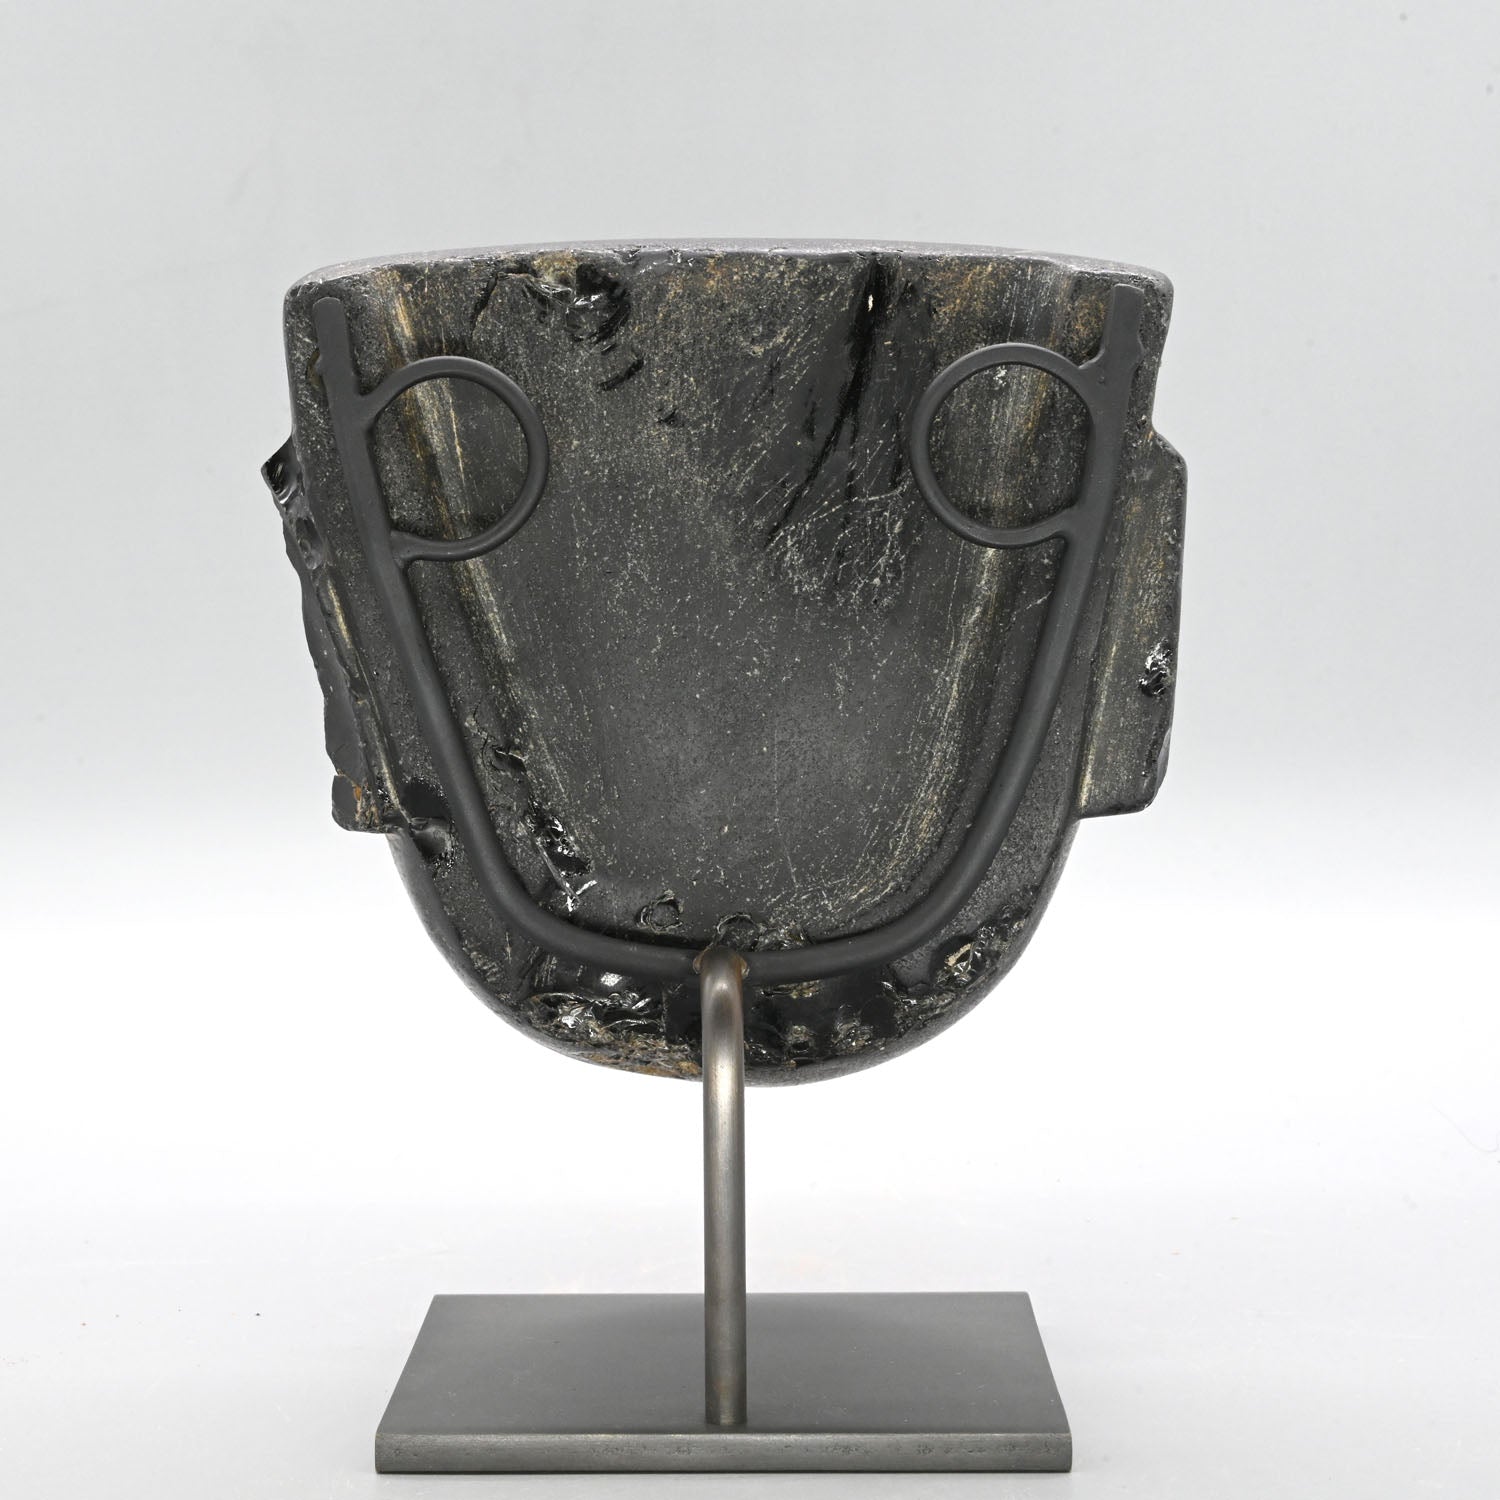 A fine Teotihuacan Obsidian Stone Mask, Early Classic Period, ca. 450 - 650 CE